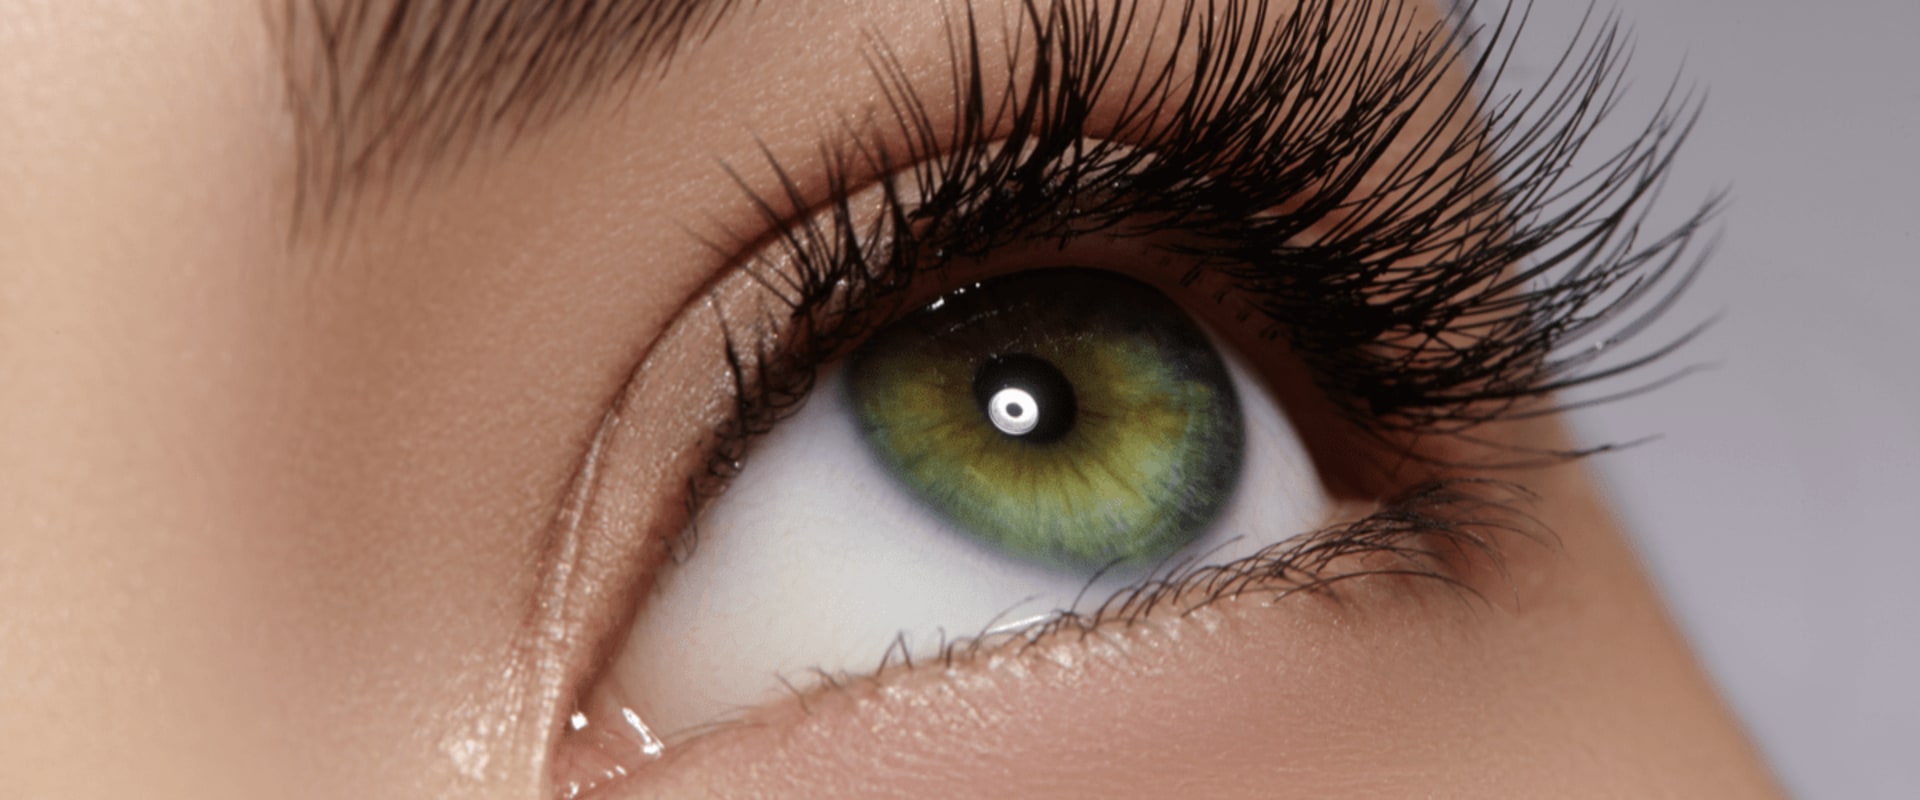 What are the most popular lash extensions?